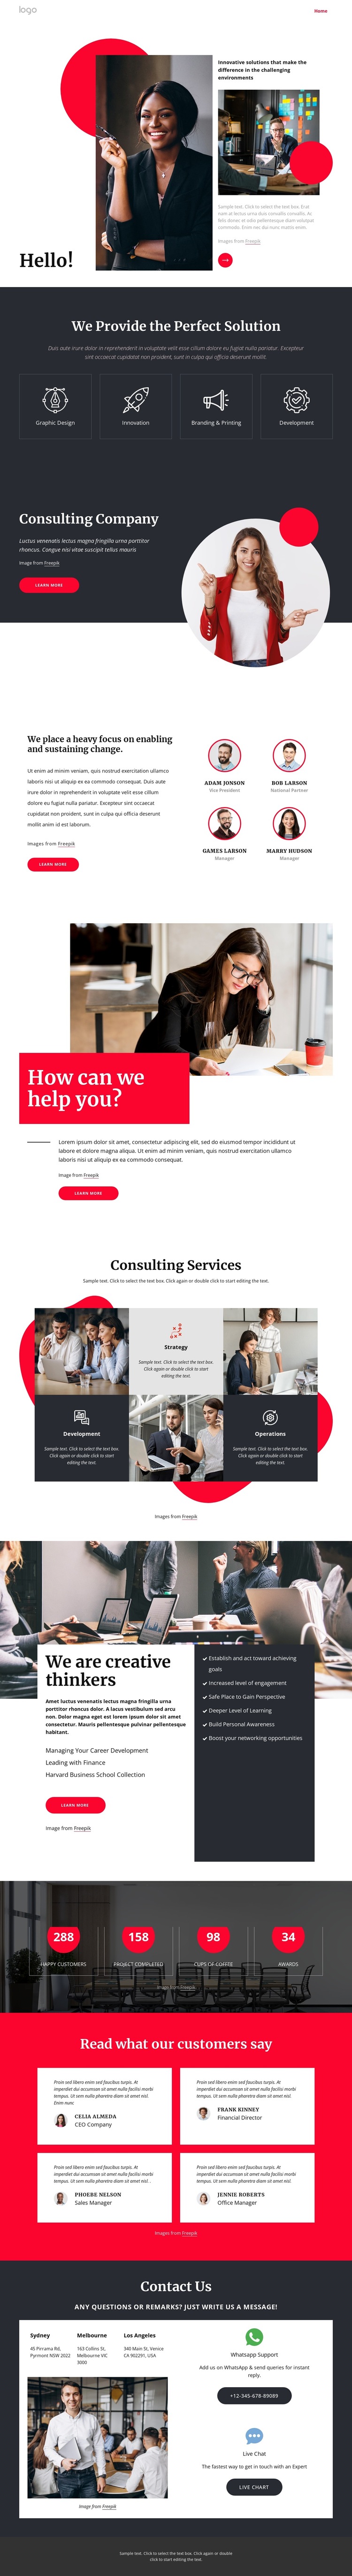 Consulting company NYC HTML5 Template